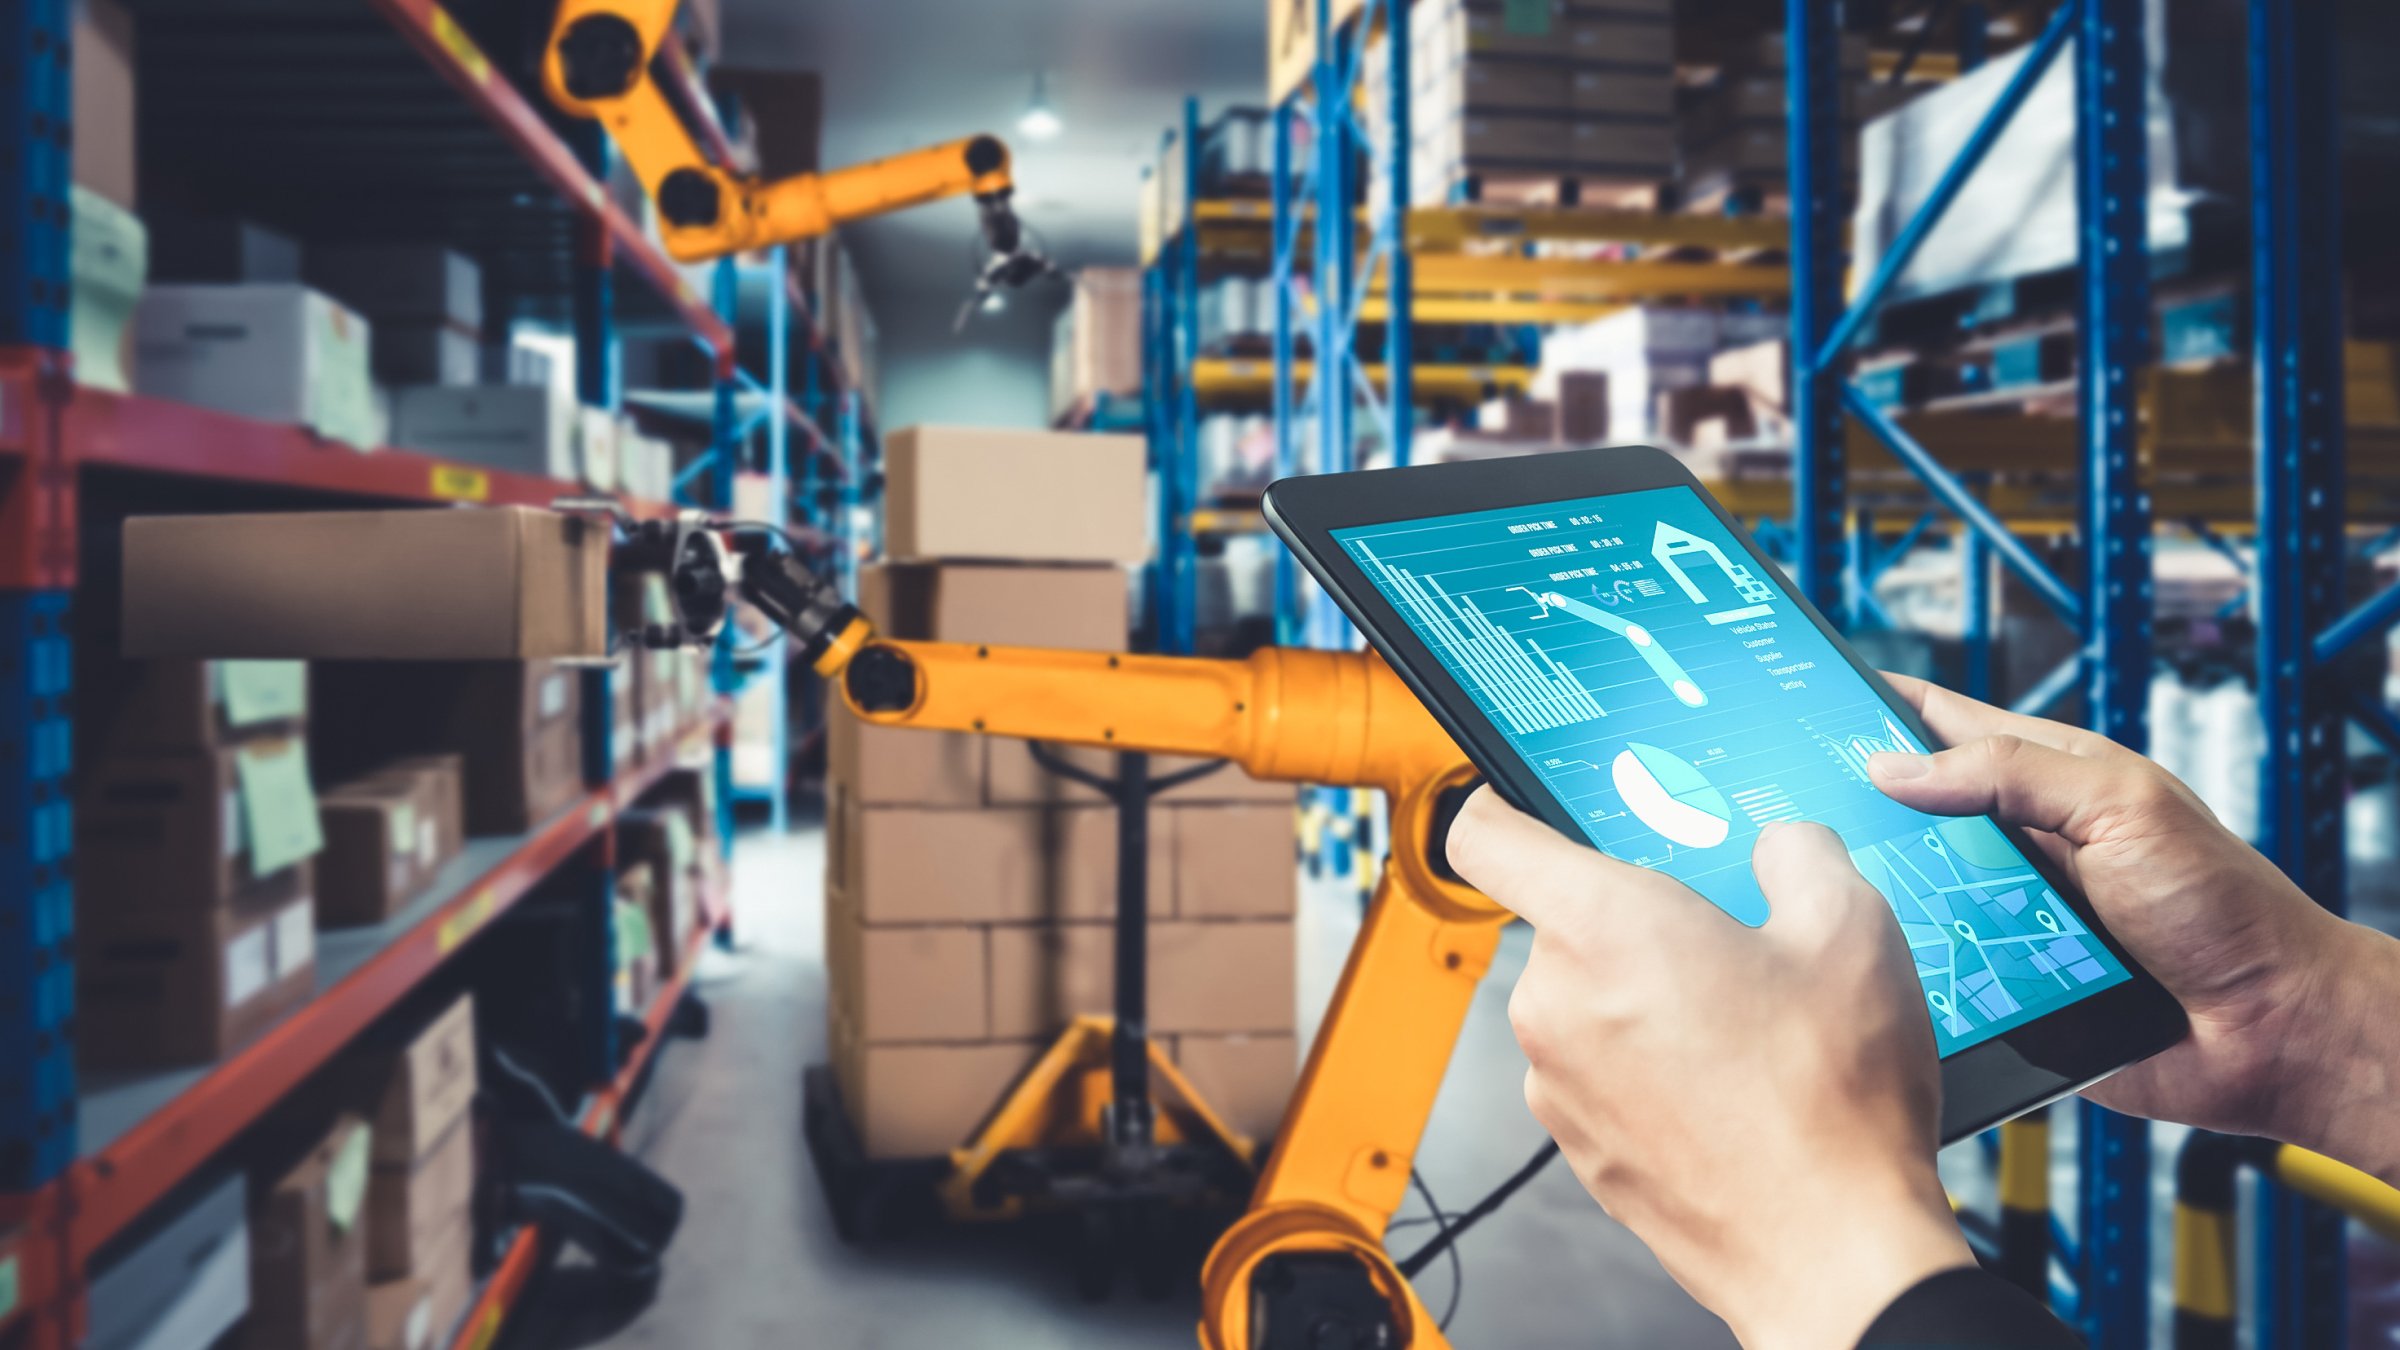 Hand holding a tablet and a smart robot arm systems for warehouse automation